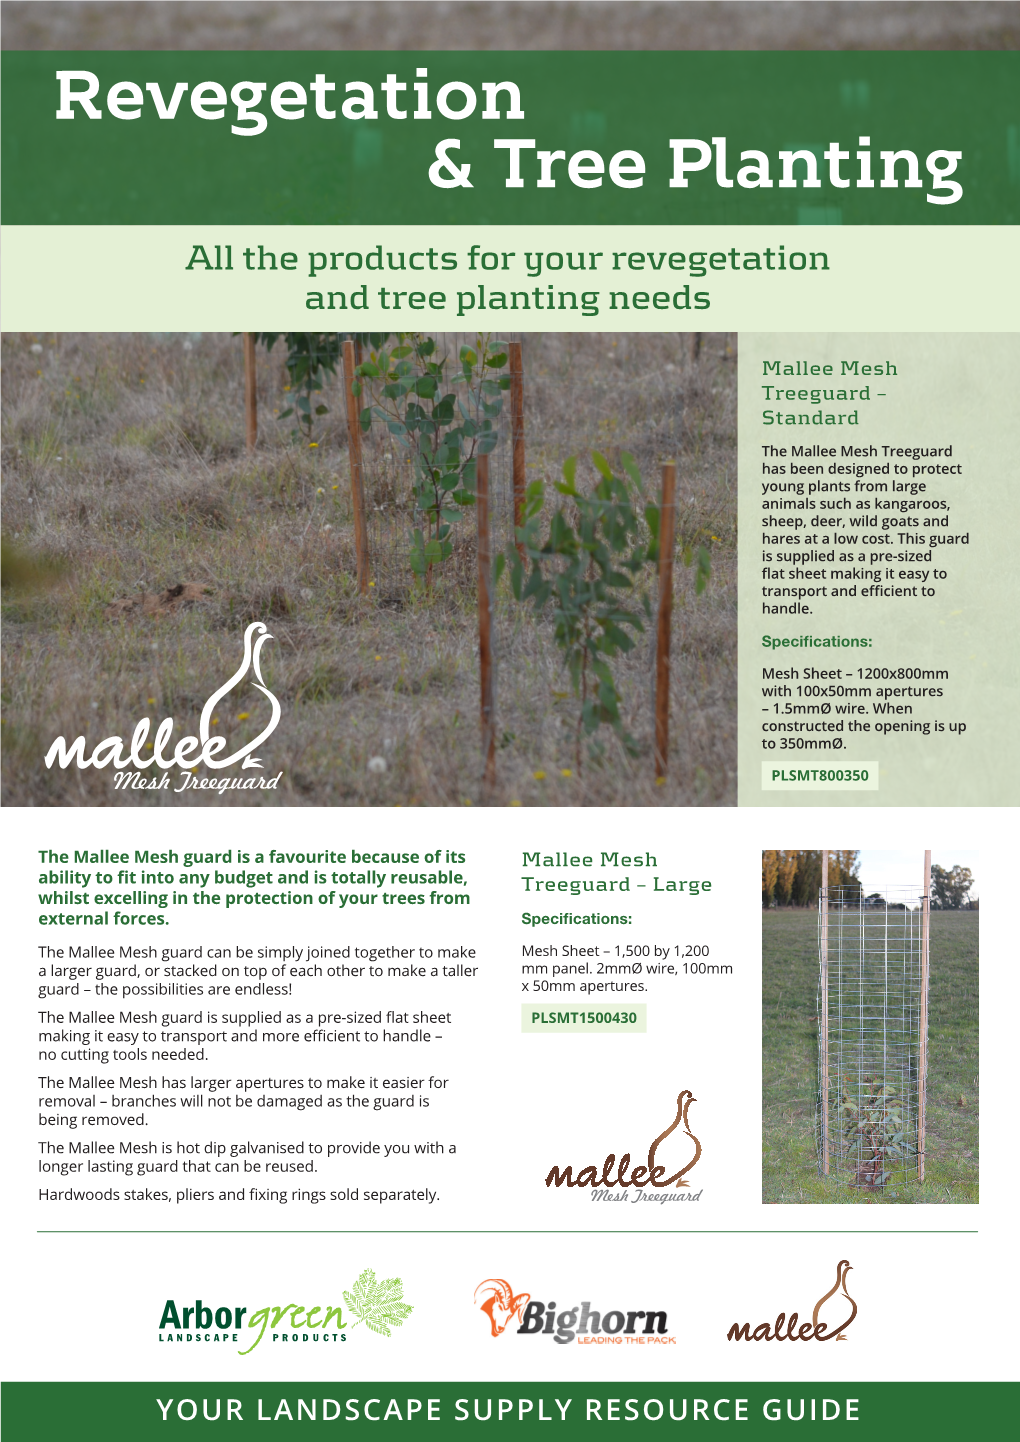 All the Products for Your Revegetation and Tree Planting Needs